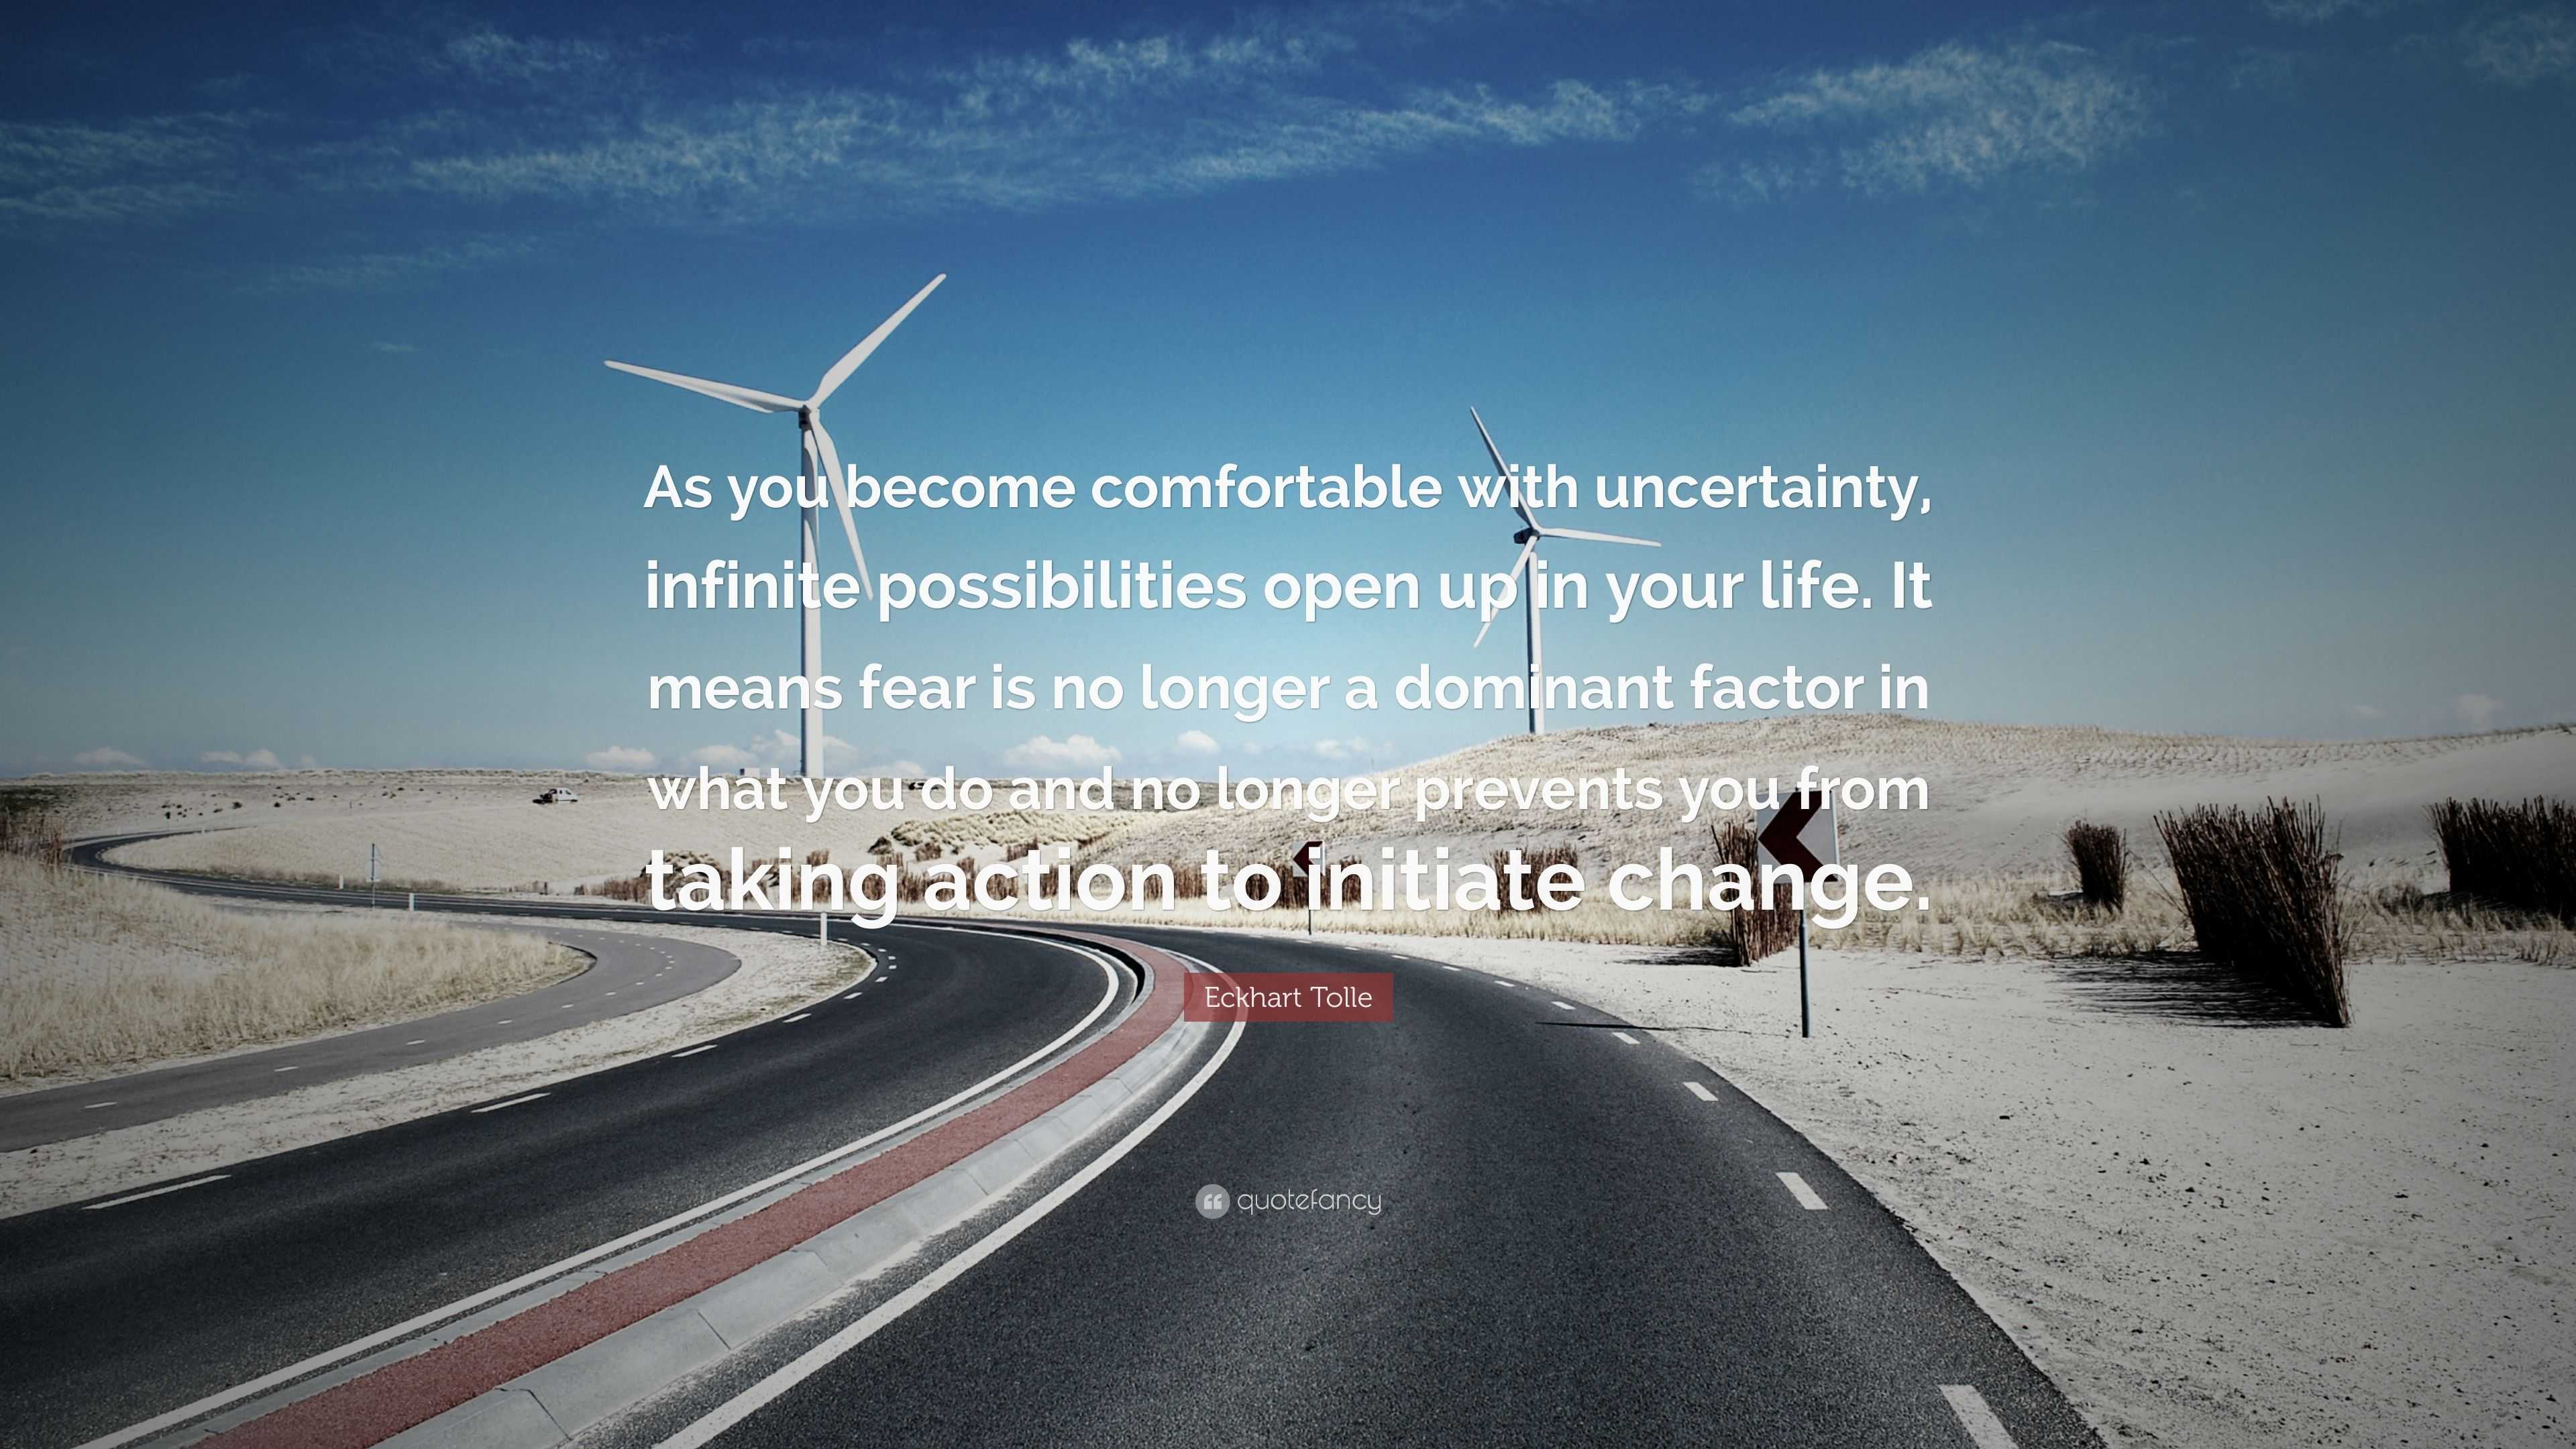 When you become comfortable with uncertainty, infinite